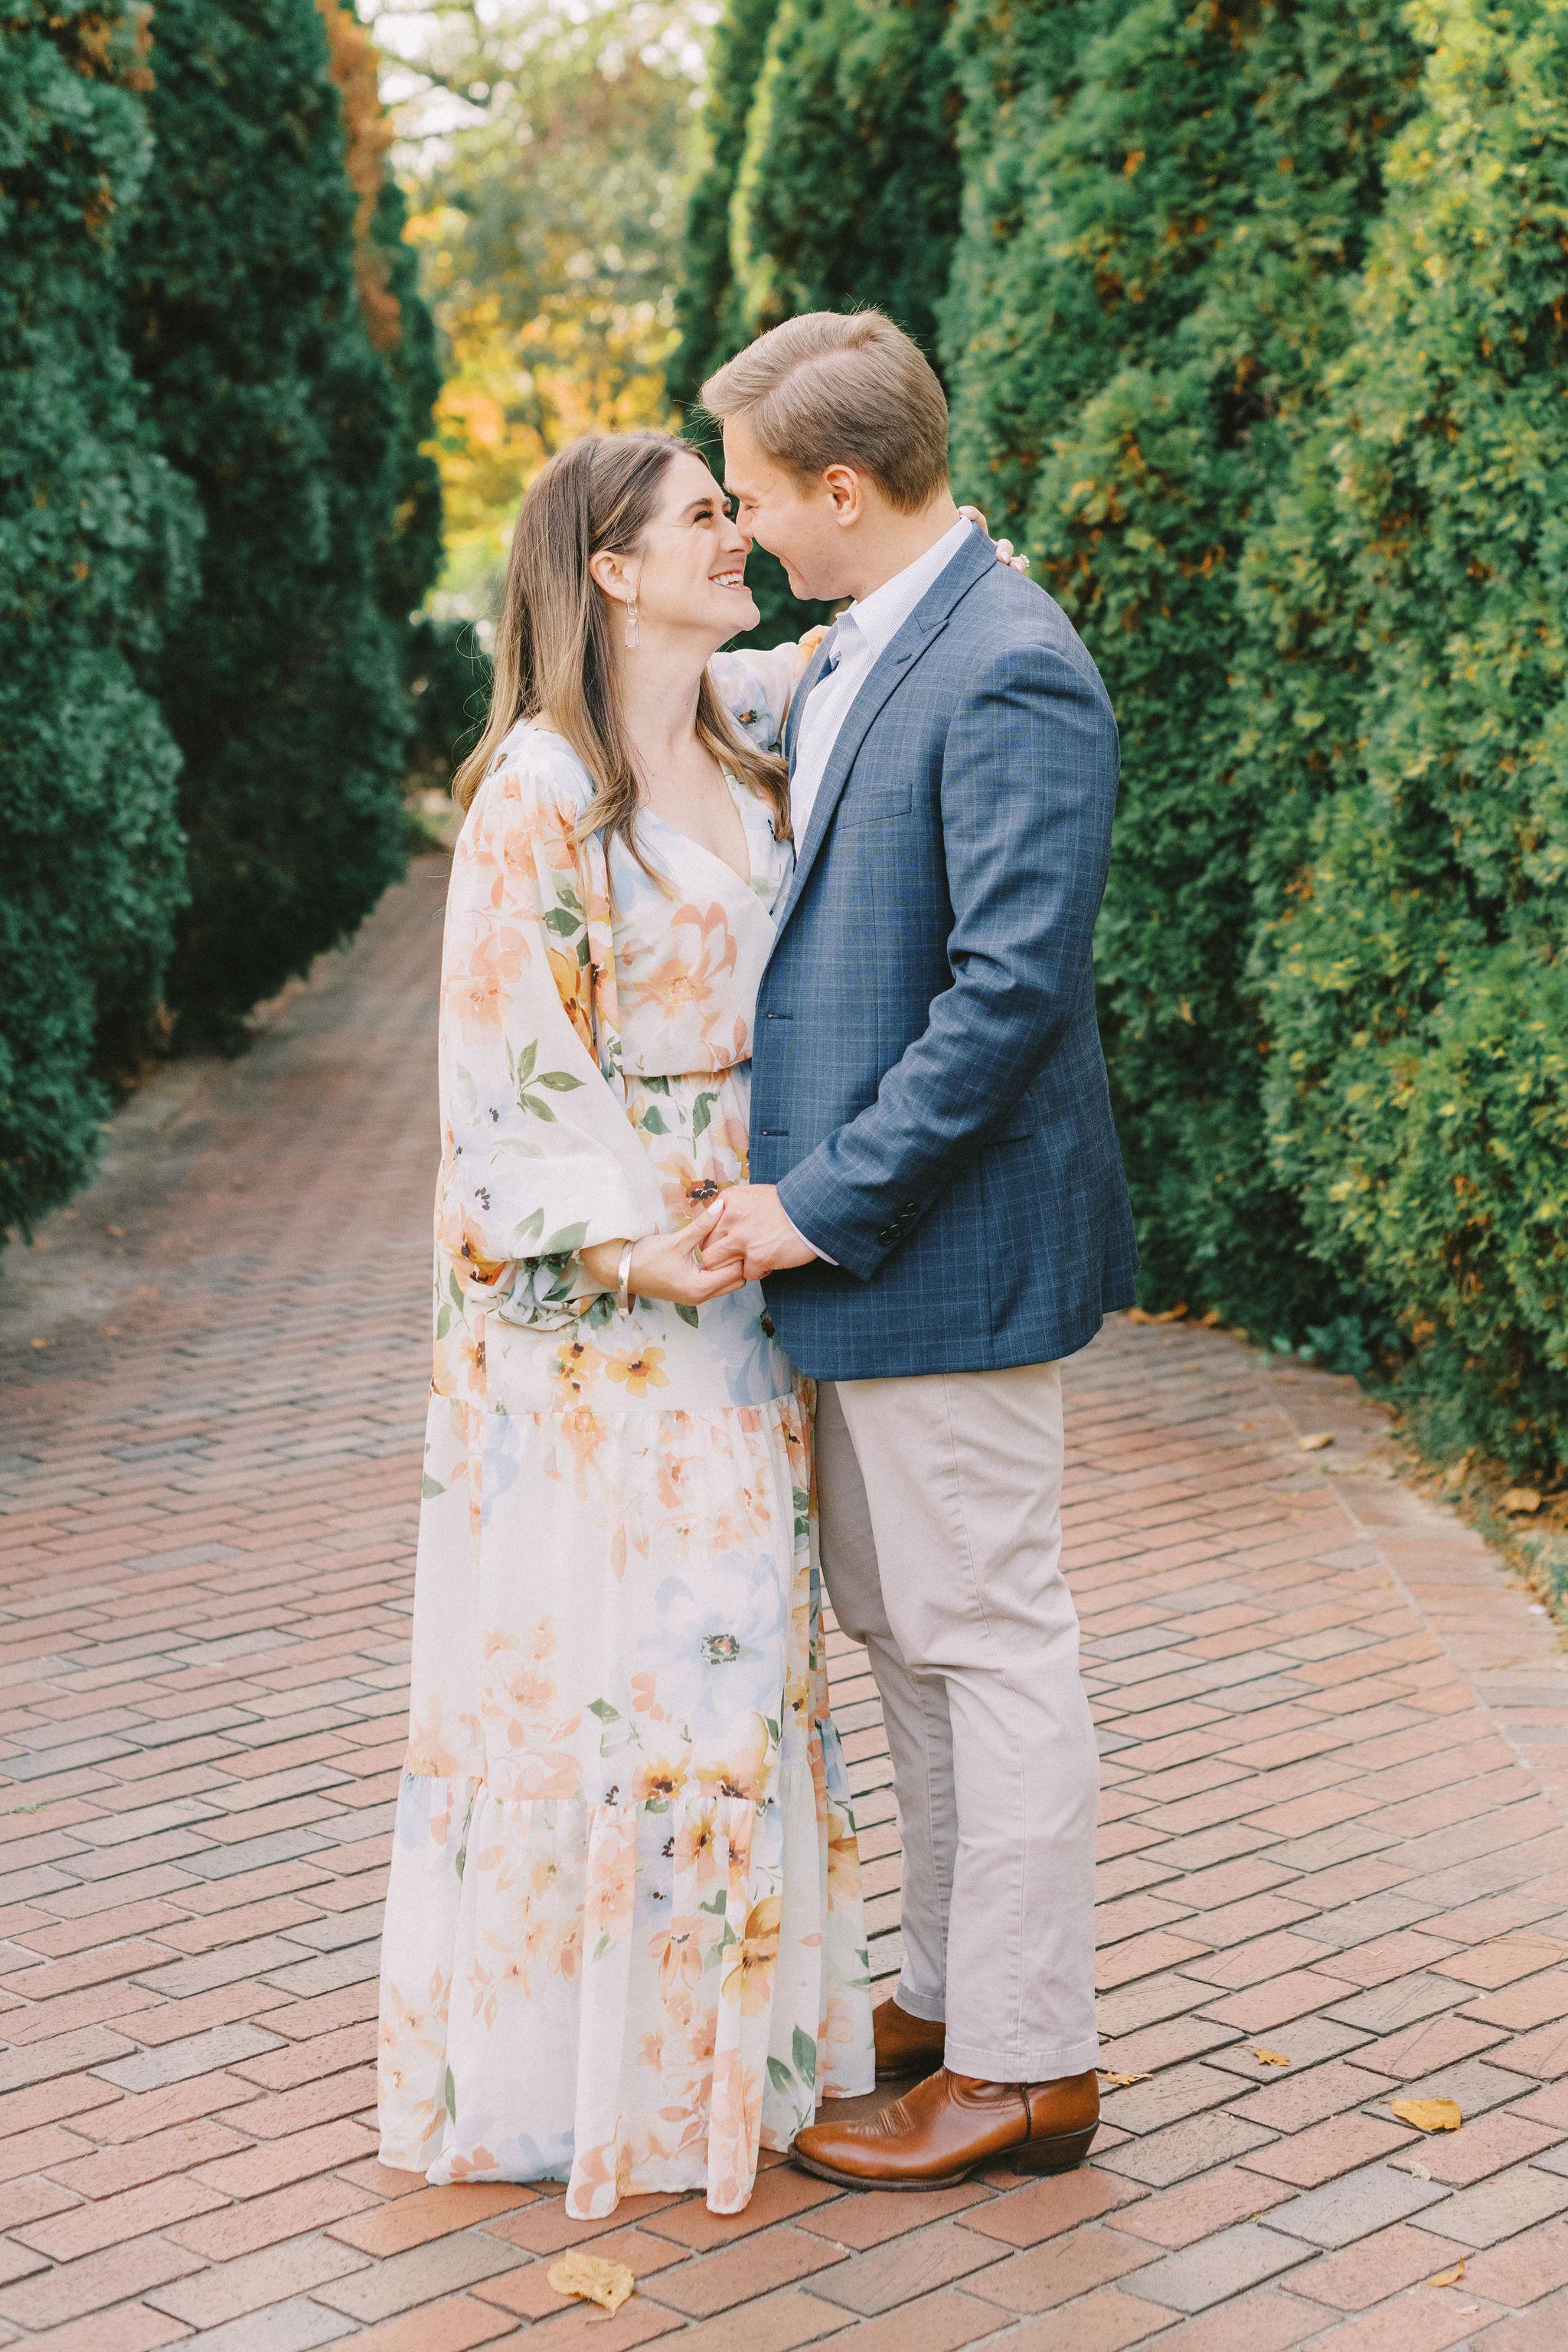 The Wedding Website of Dallas Stricklen and Seth Wilkerson